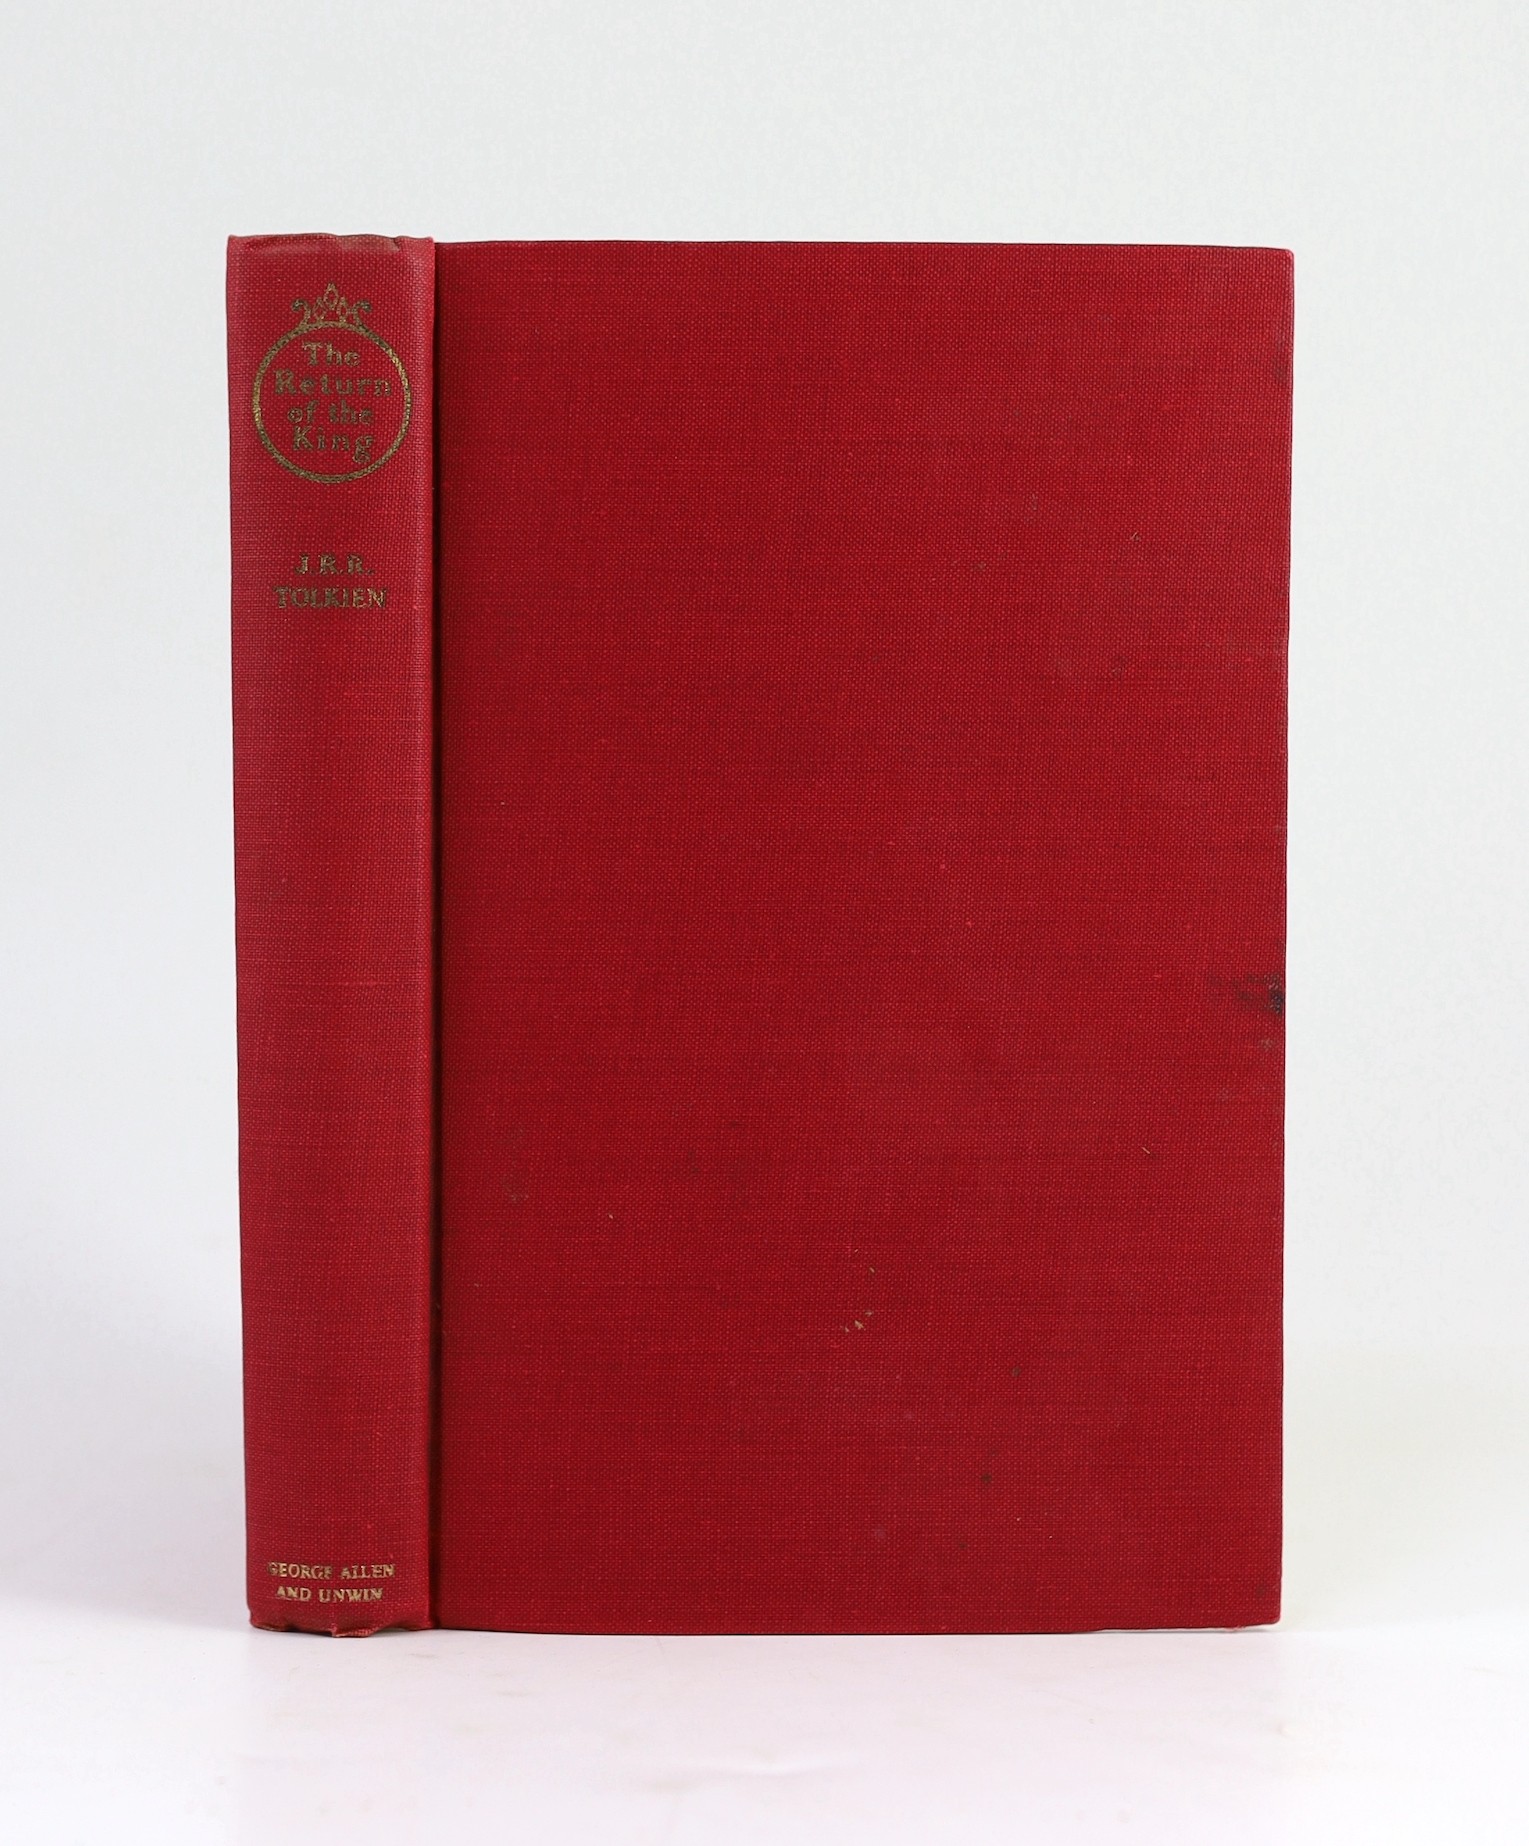 ° ° Tolkien, John Ronald Reuel - The Lord of the Rings, 1st editions, 1st impressions of Towers - Image 15 of 19